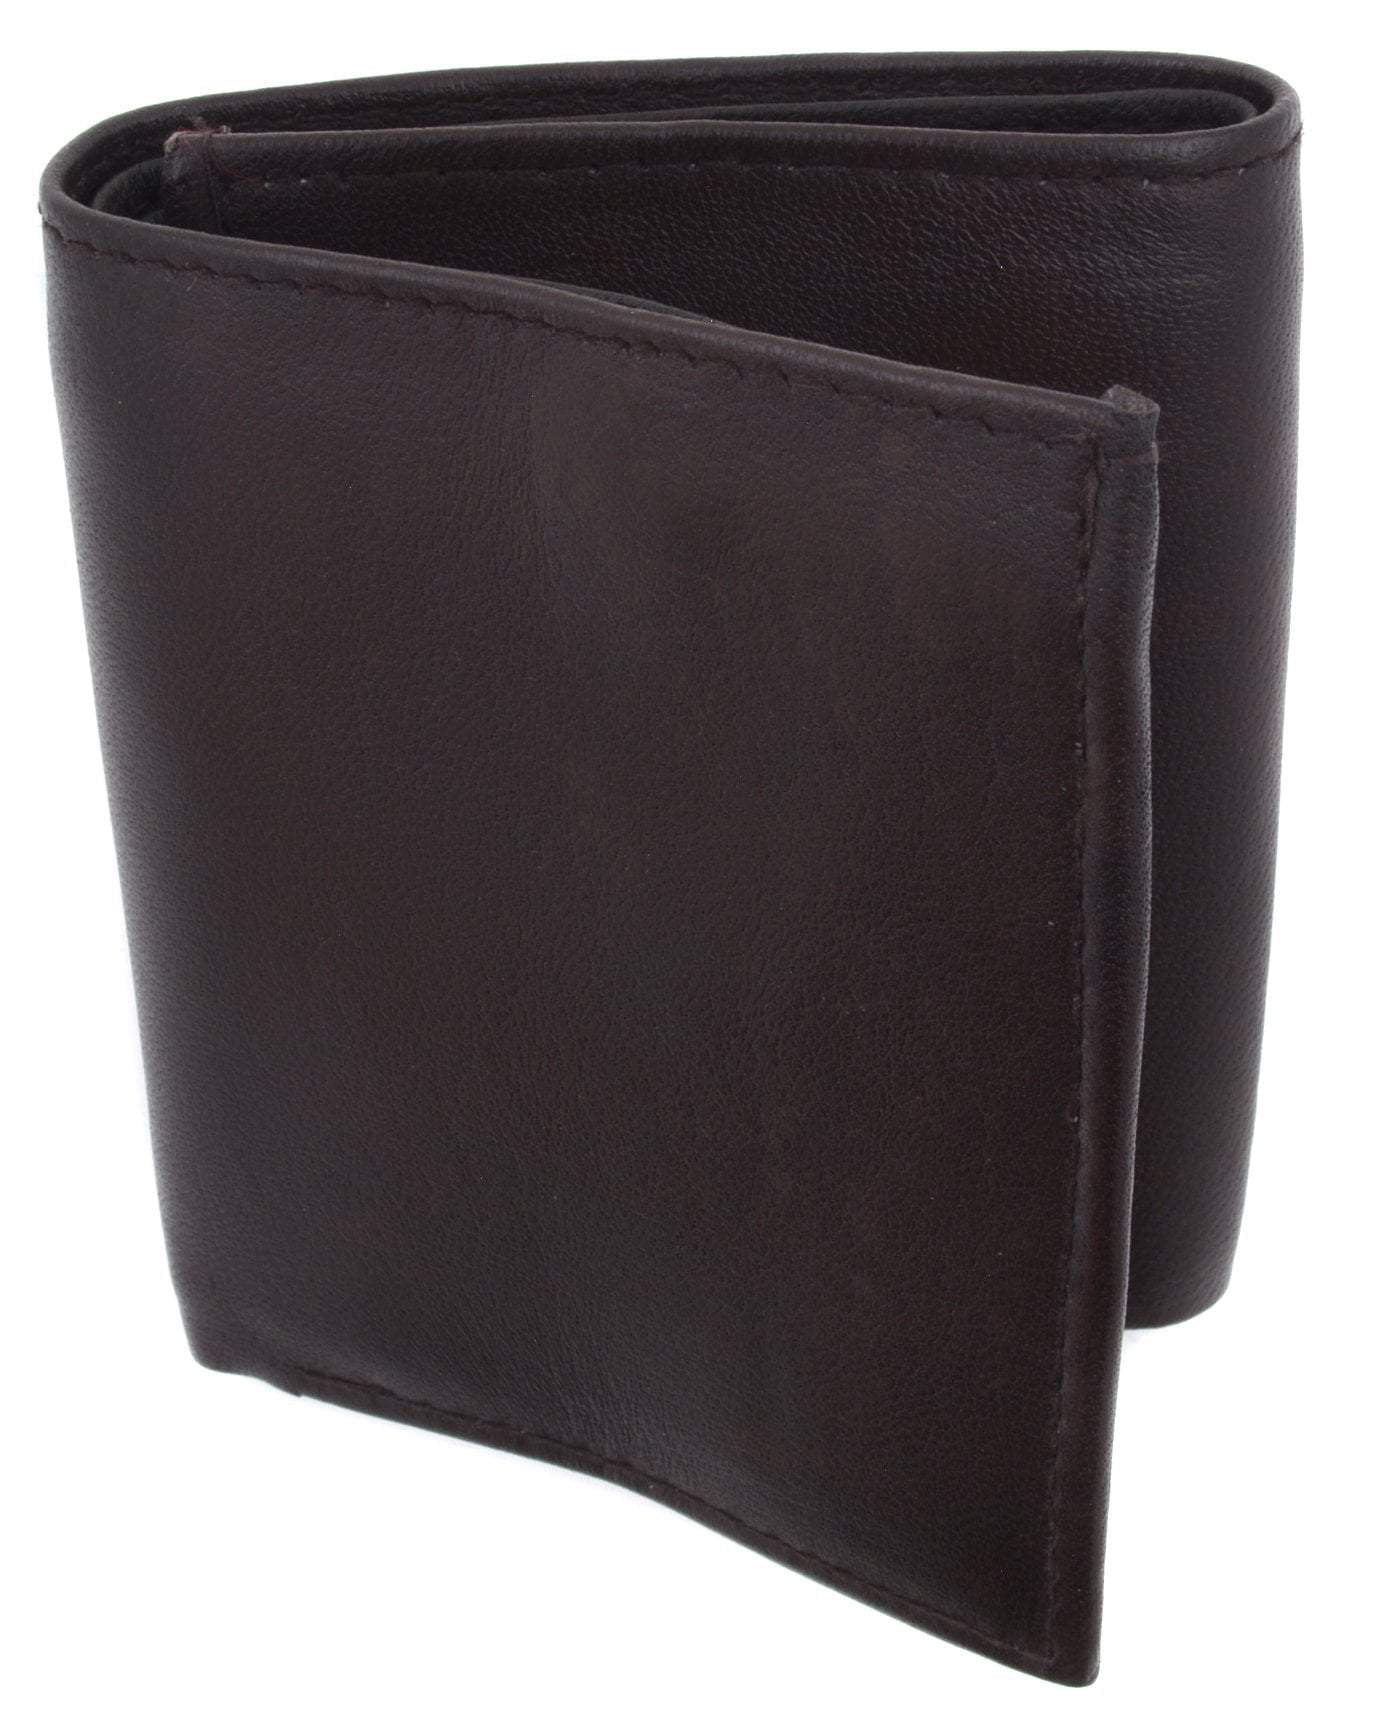 Trifold Leather Wallet W/ Zippered Pockets & ID Window 1655 